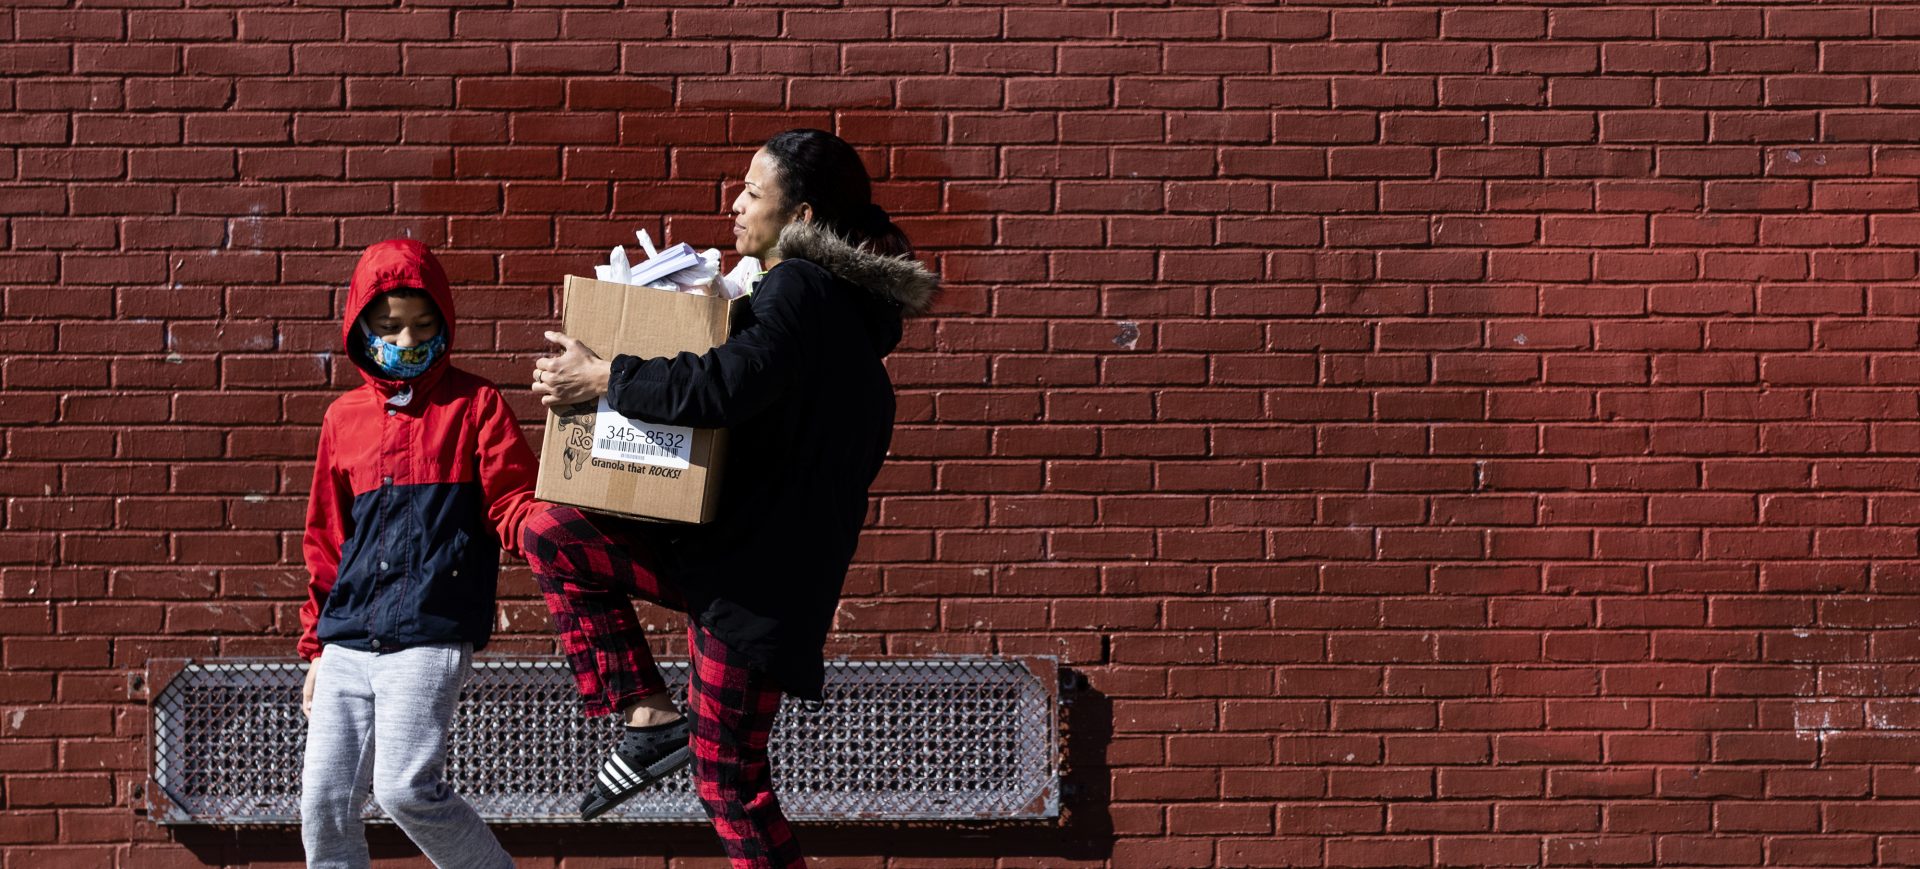 A woman carries a box of donated food and educational materials that she picked up at John H. Webster Elementary School in Philadelphia, Thursday, March 26, 2020. Gov. Tom Wolf’s administration reported more new coronavirus-related deaths in Pennsylvania on Wednesday. Residents are ordered to stay home, with few exceptions.